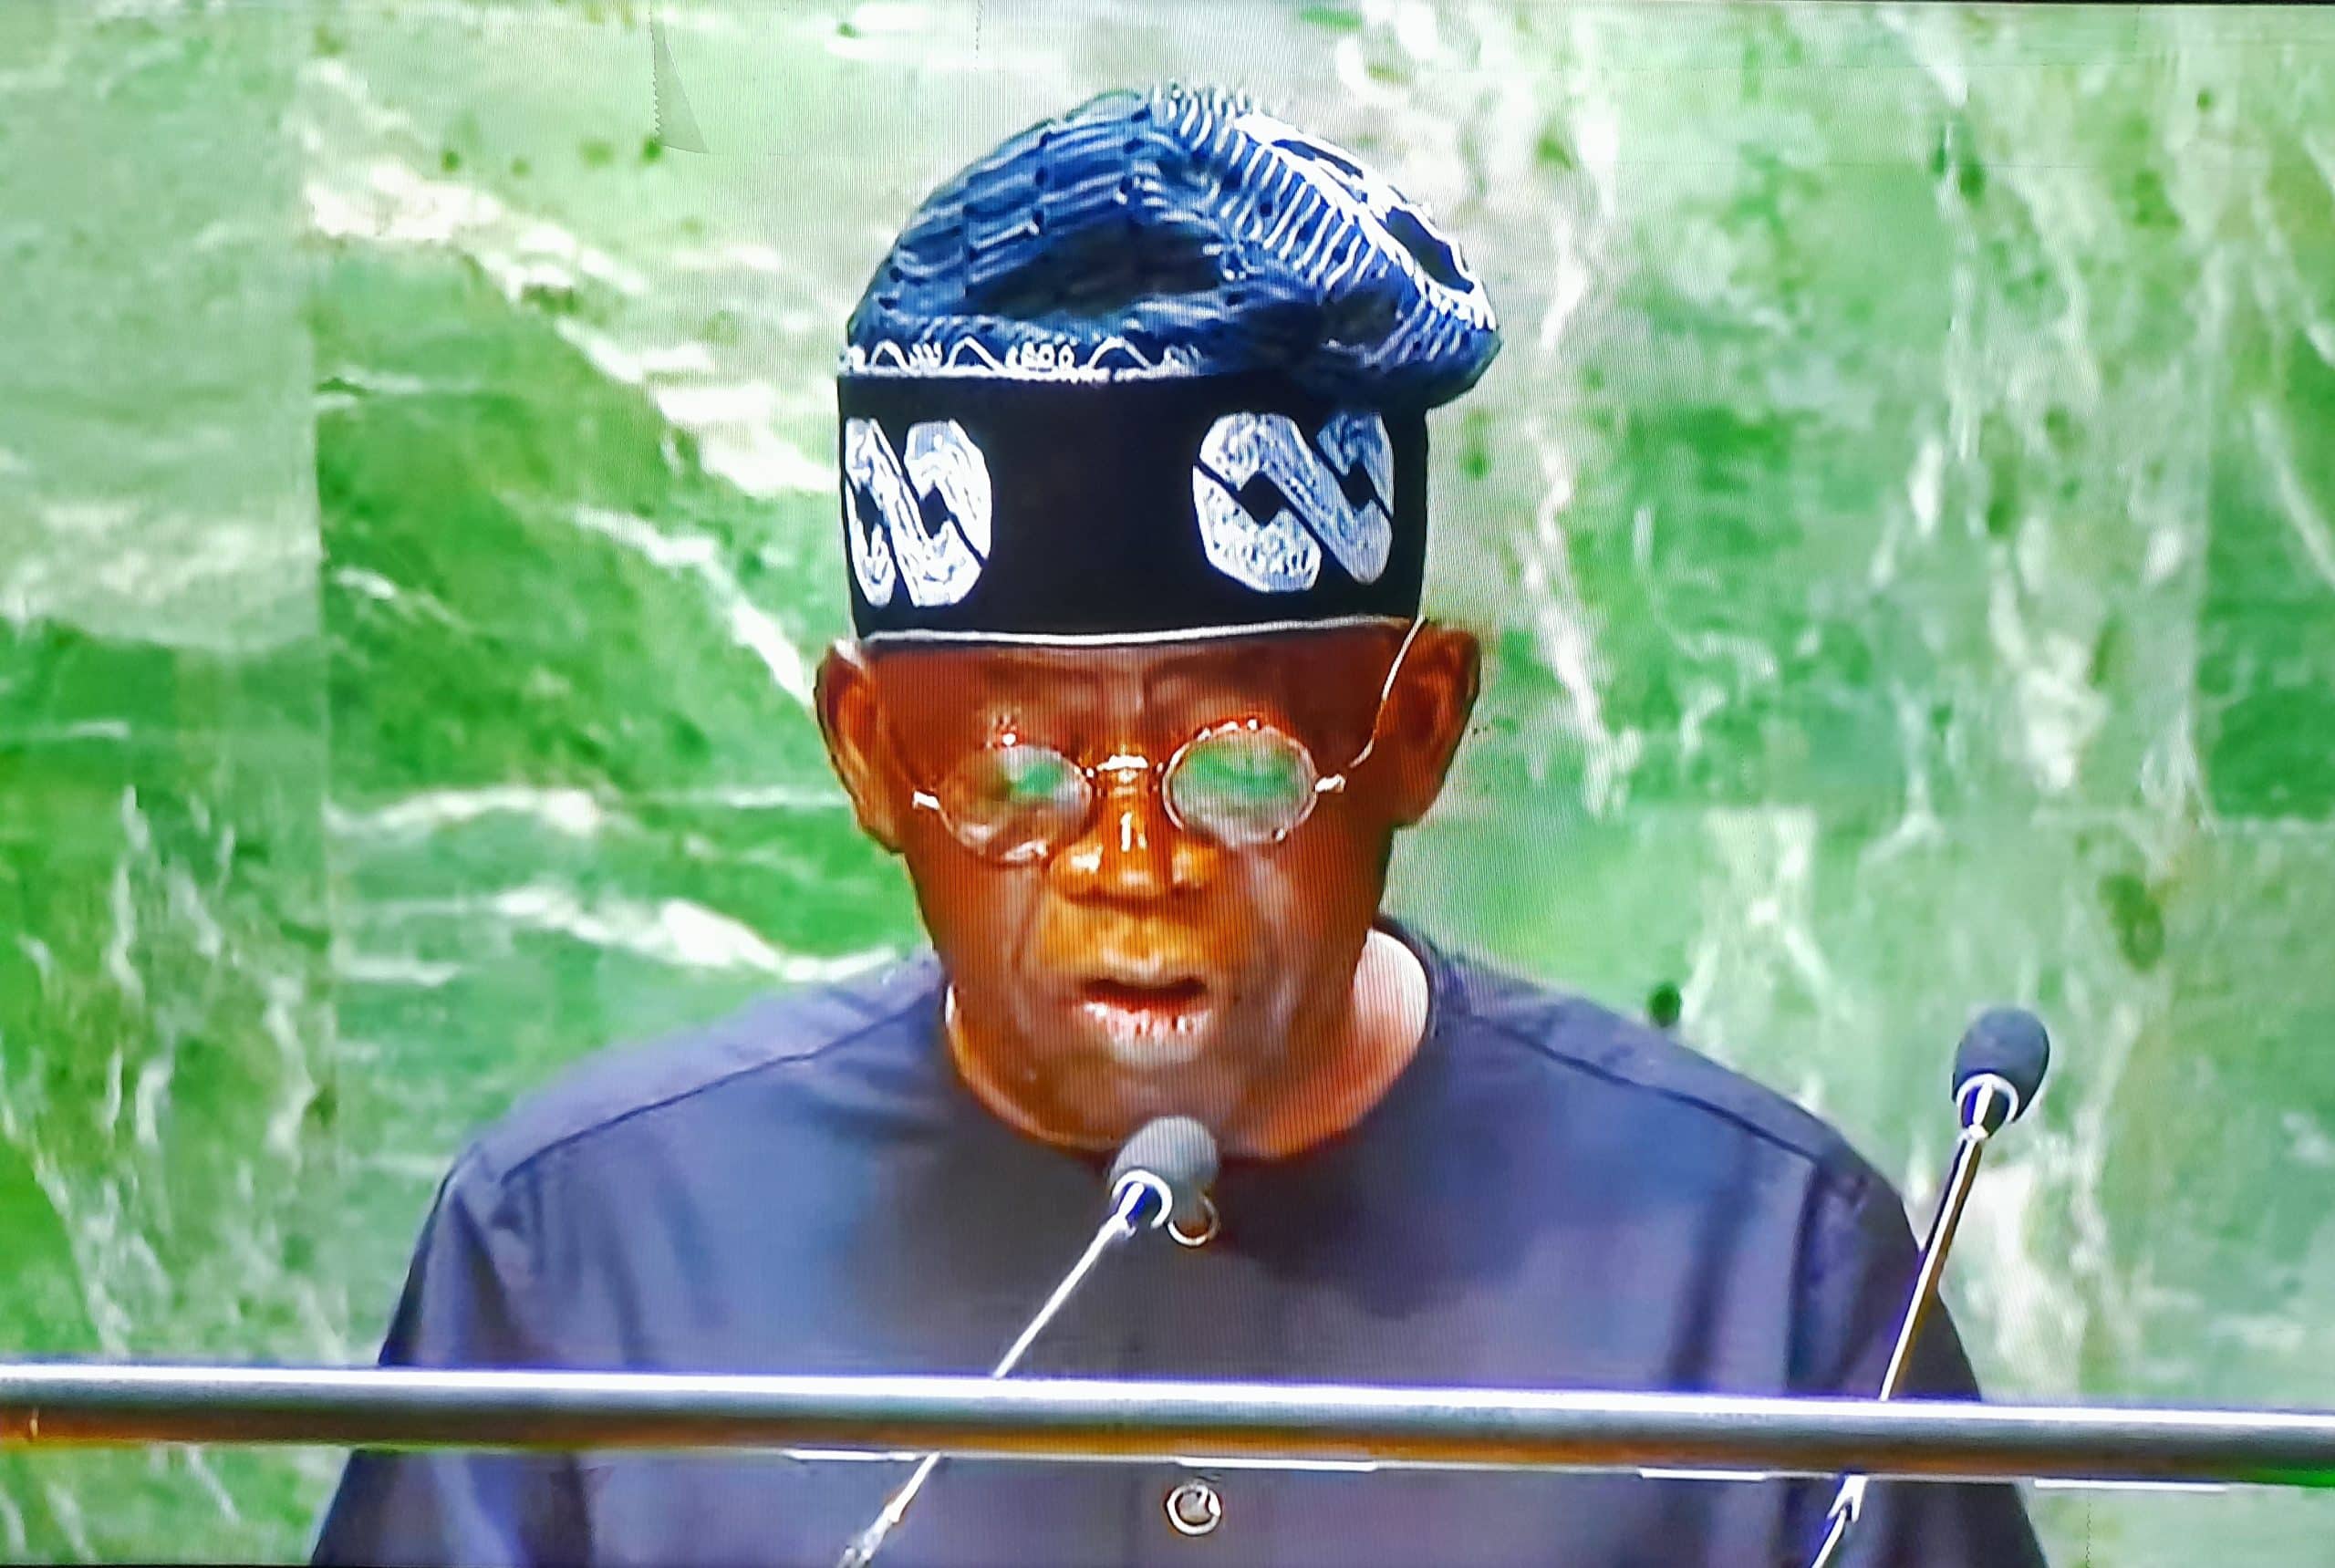 Five things to know from Tinubu’s UN General Assembly speech